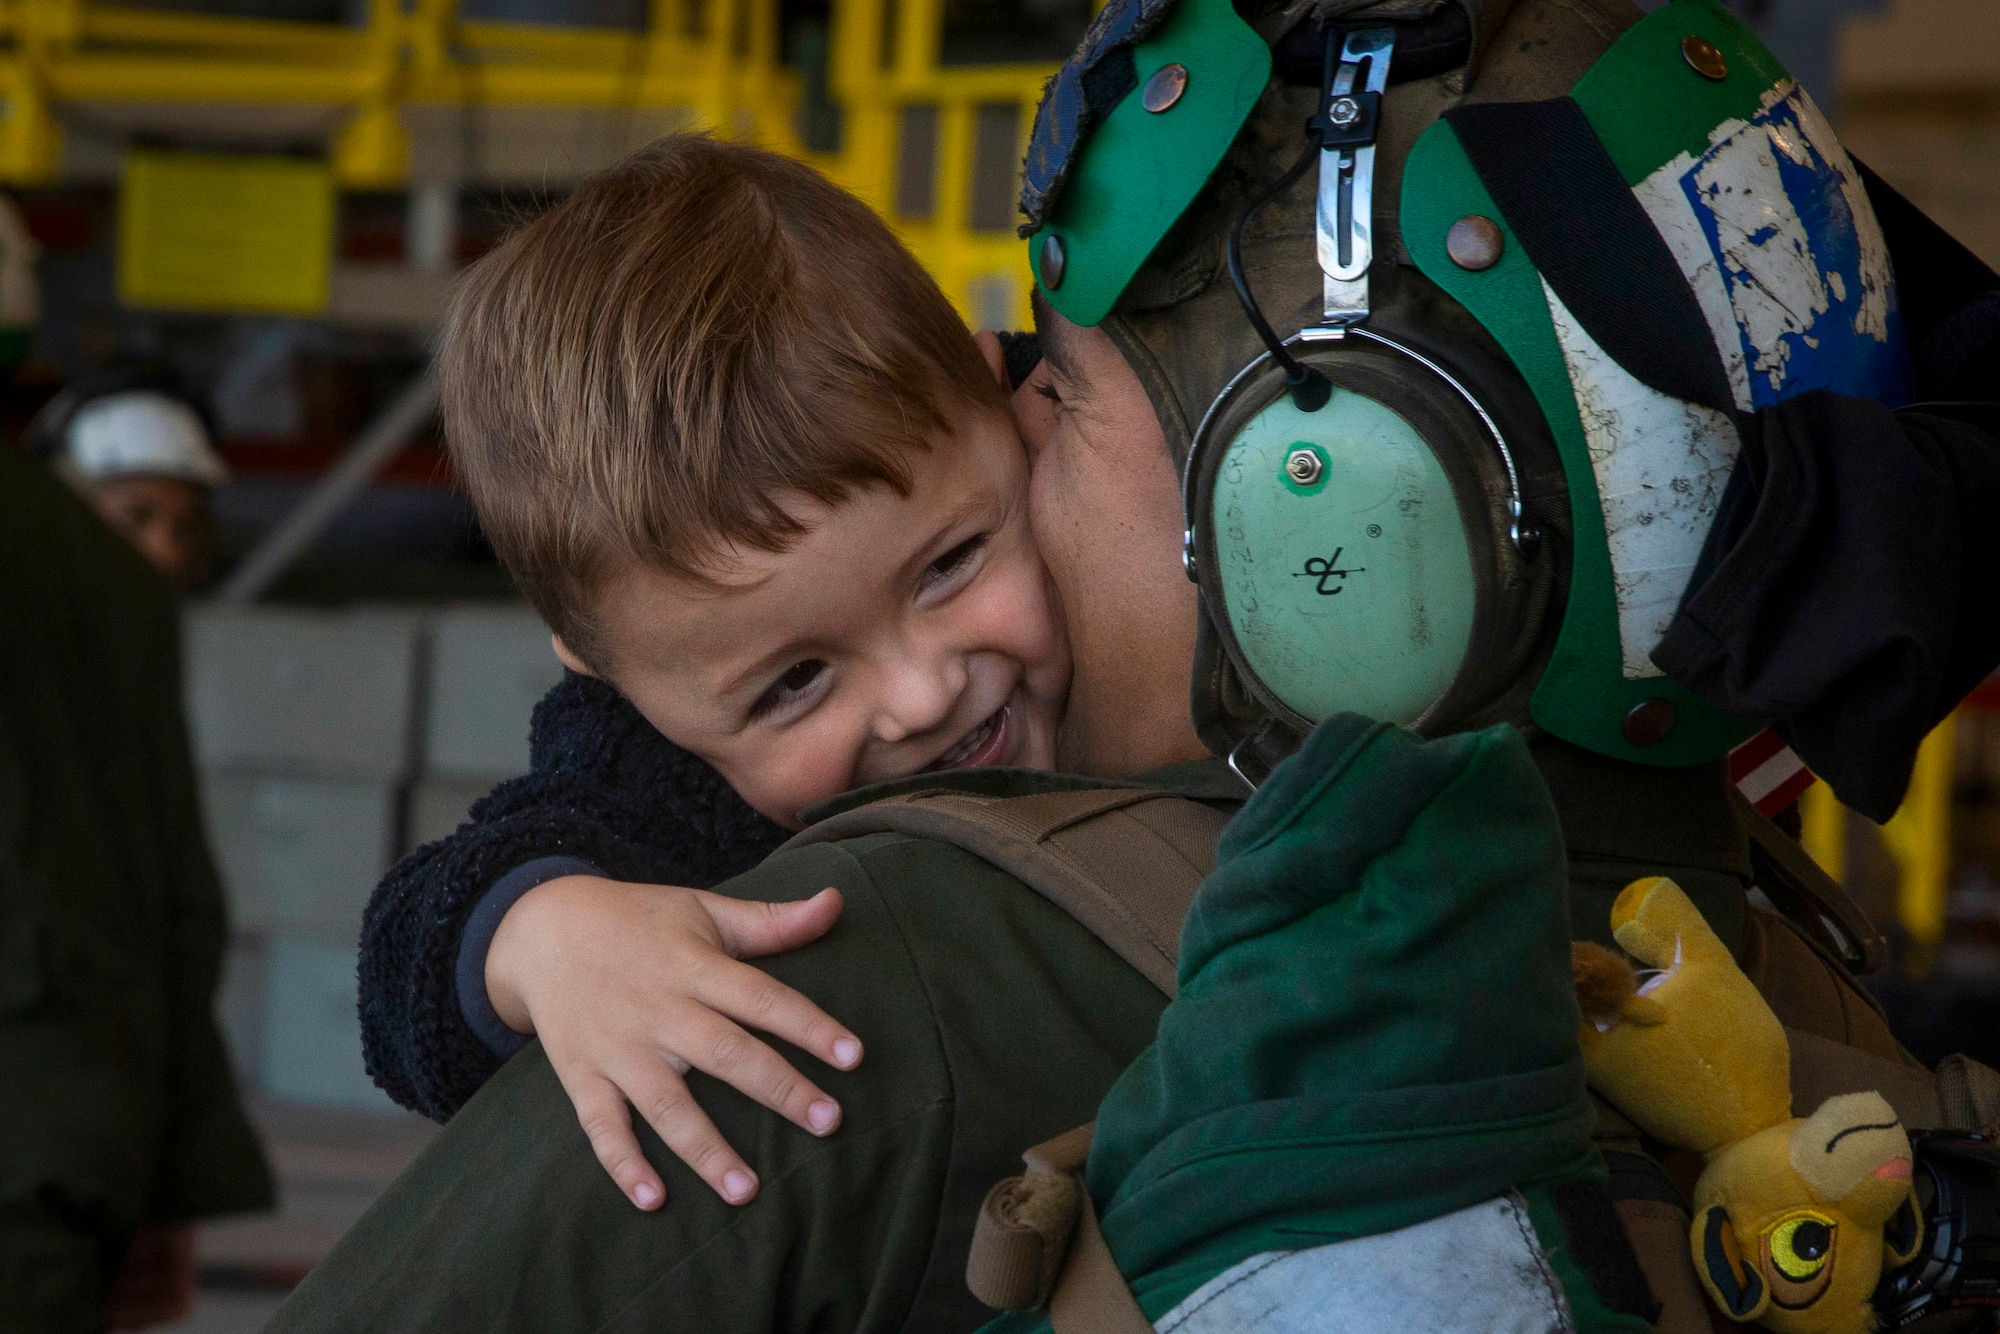 A Marine holds a smiling boy.